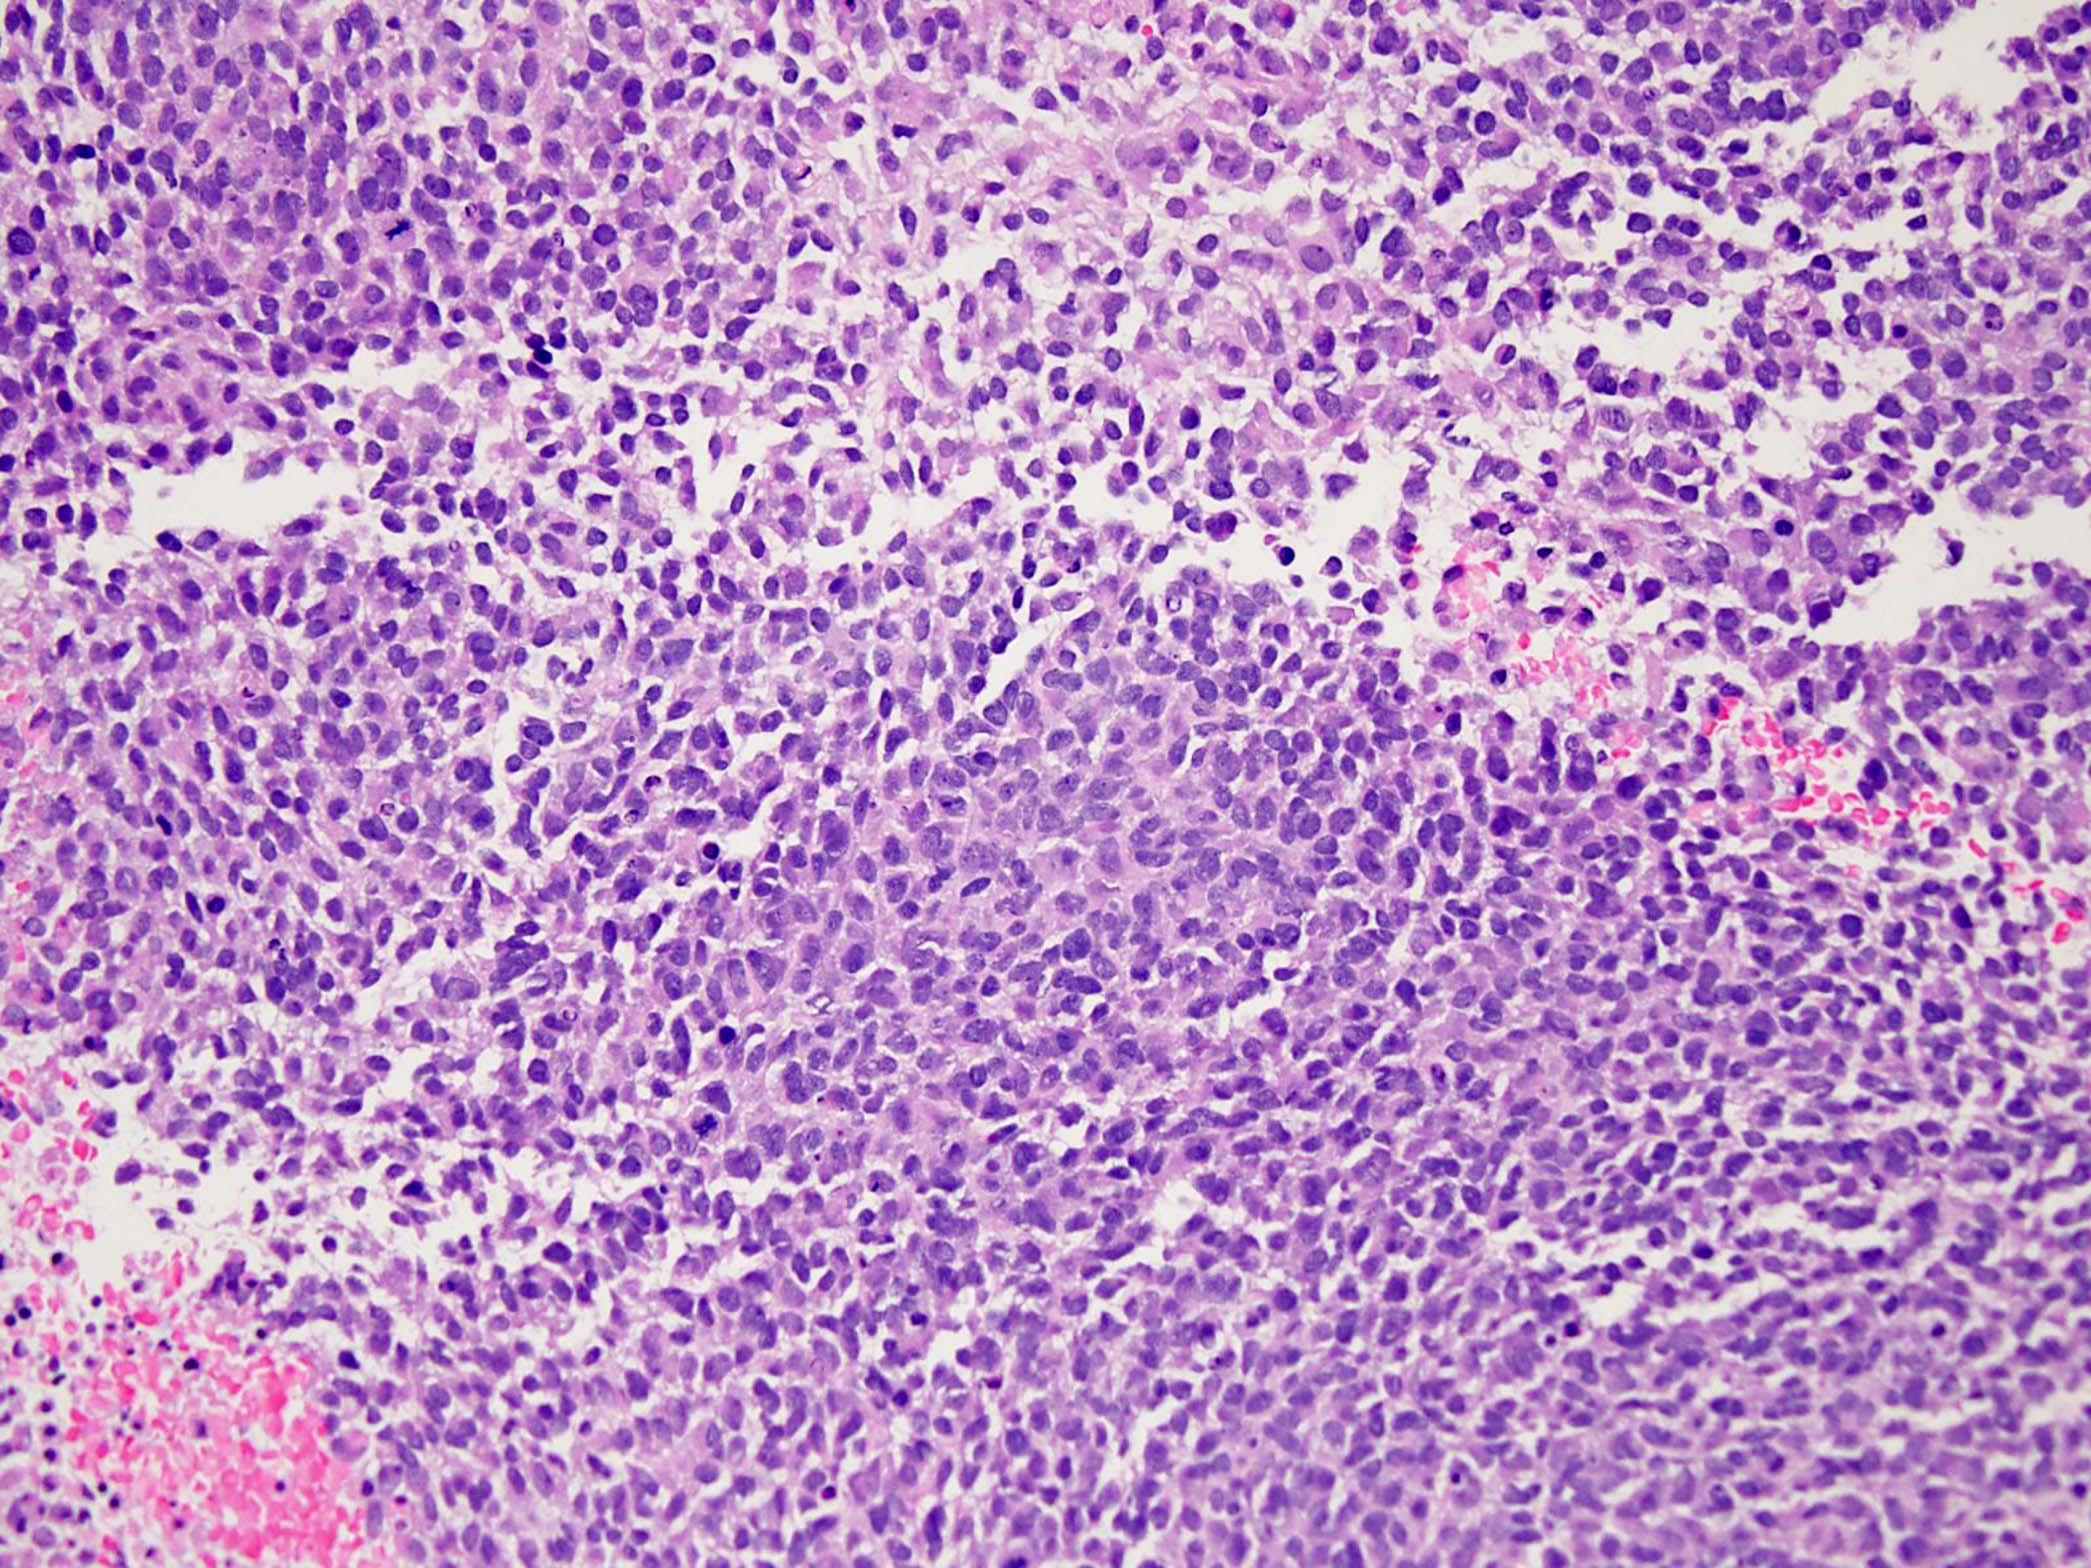 Sarcoma with BCOR genetic alterations